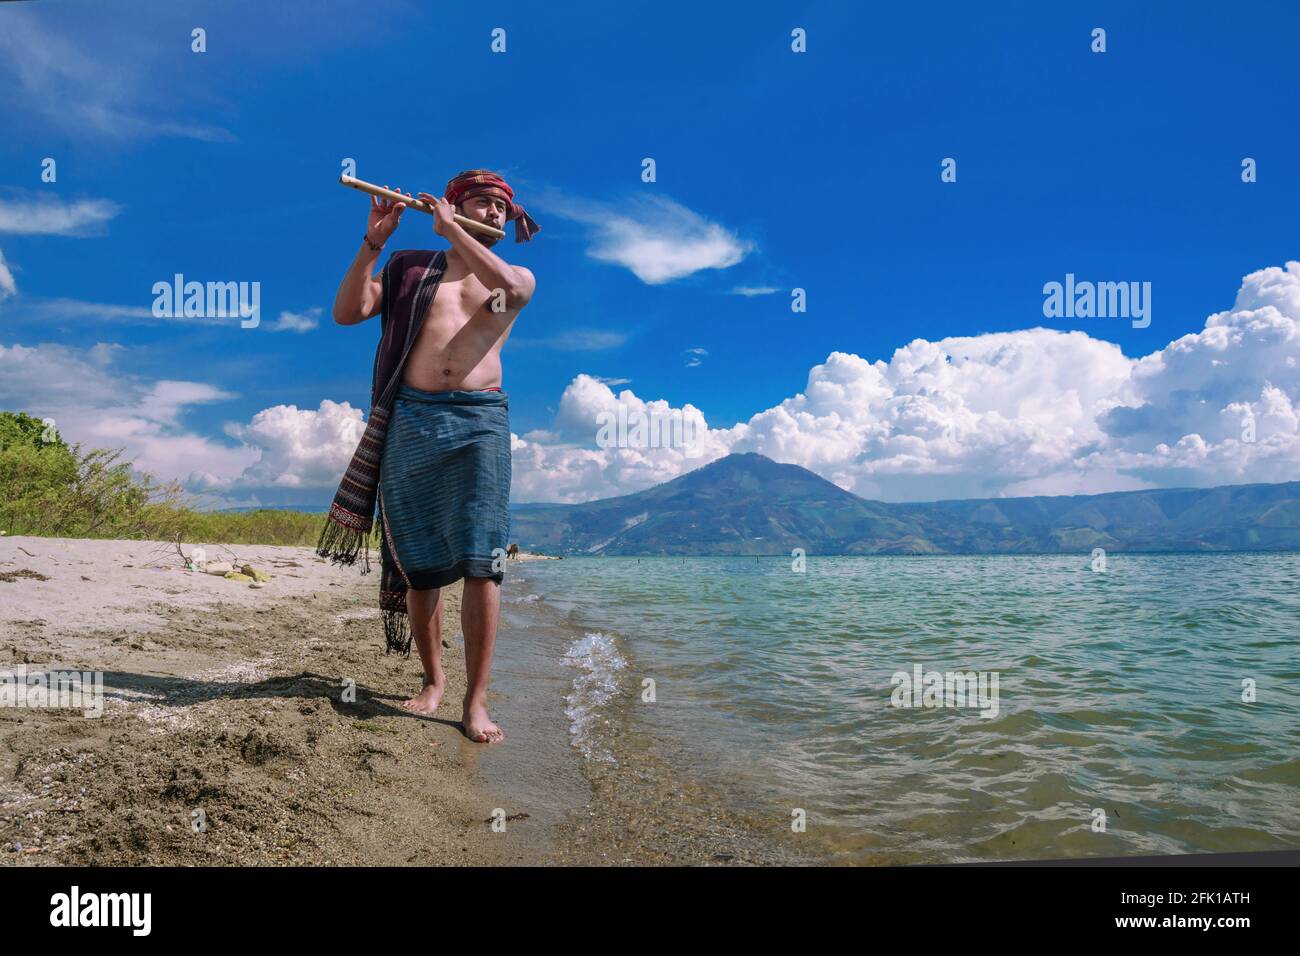 A man playing a distilled musical instrument on the shores of Lake Toba Stock Photo